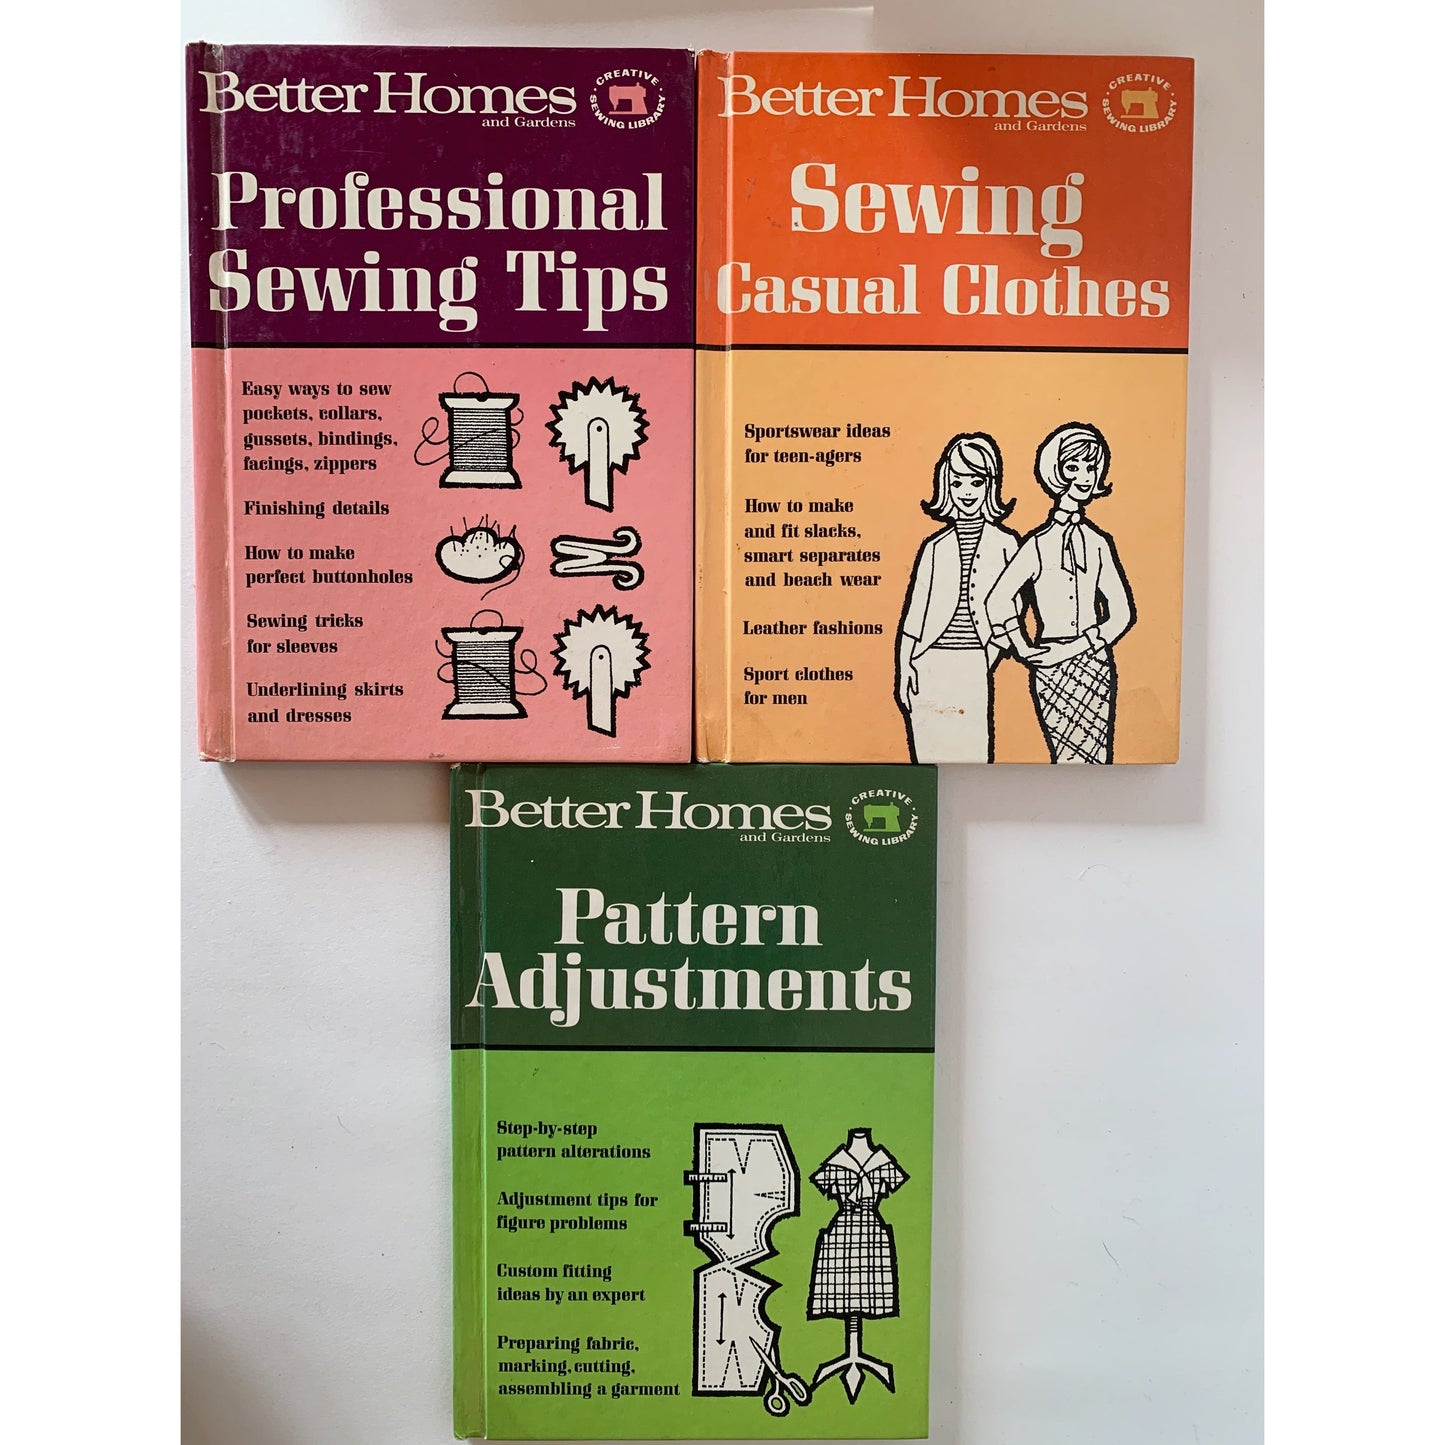 Better Homes and Gardens Sewing Books 1966 Hardcovers